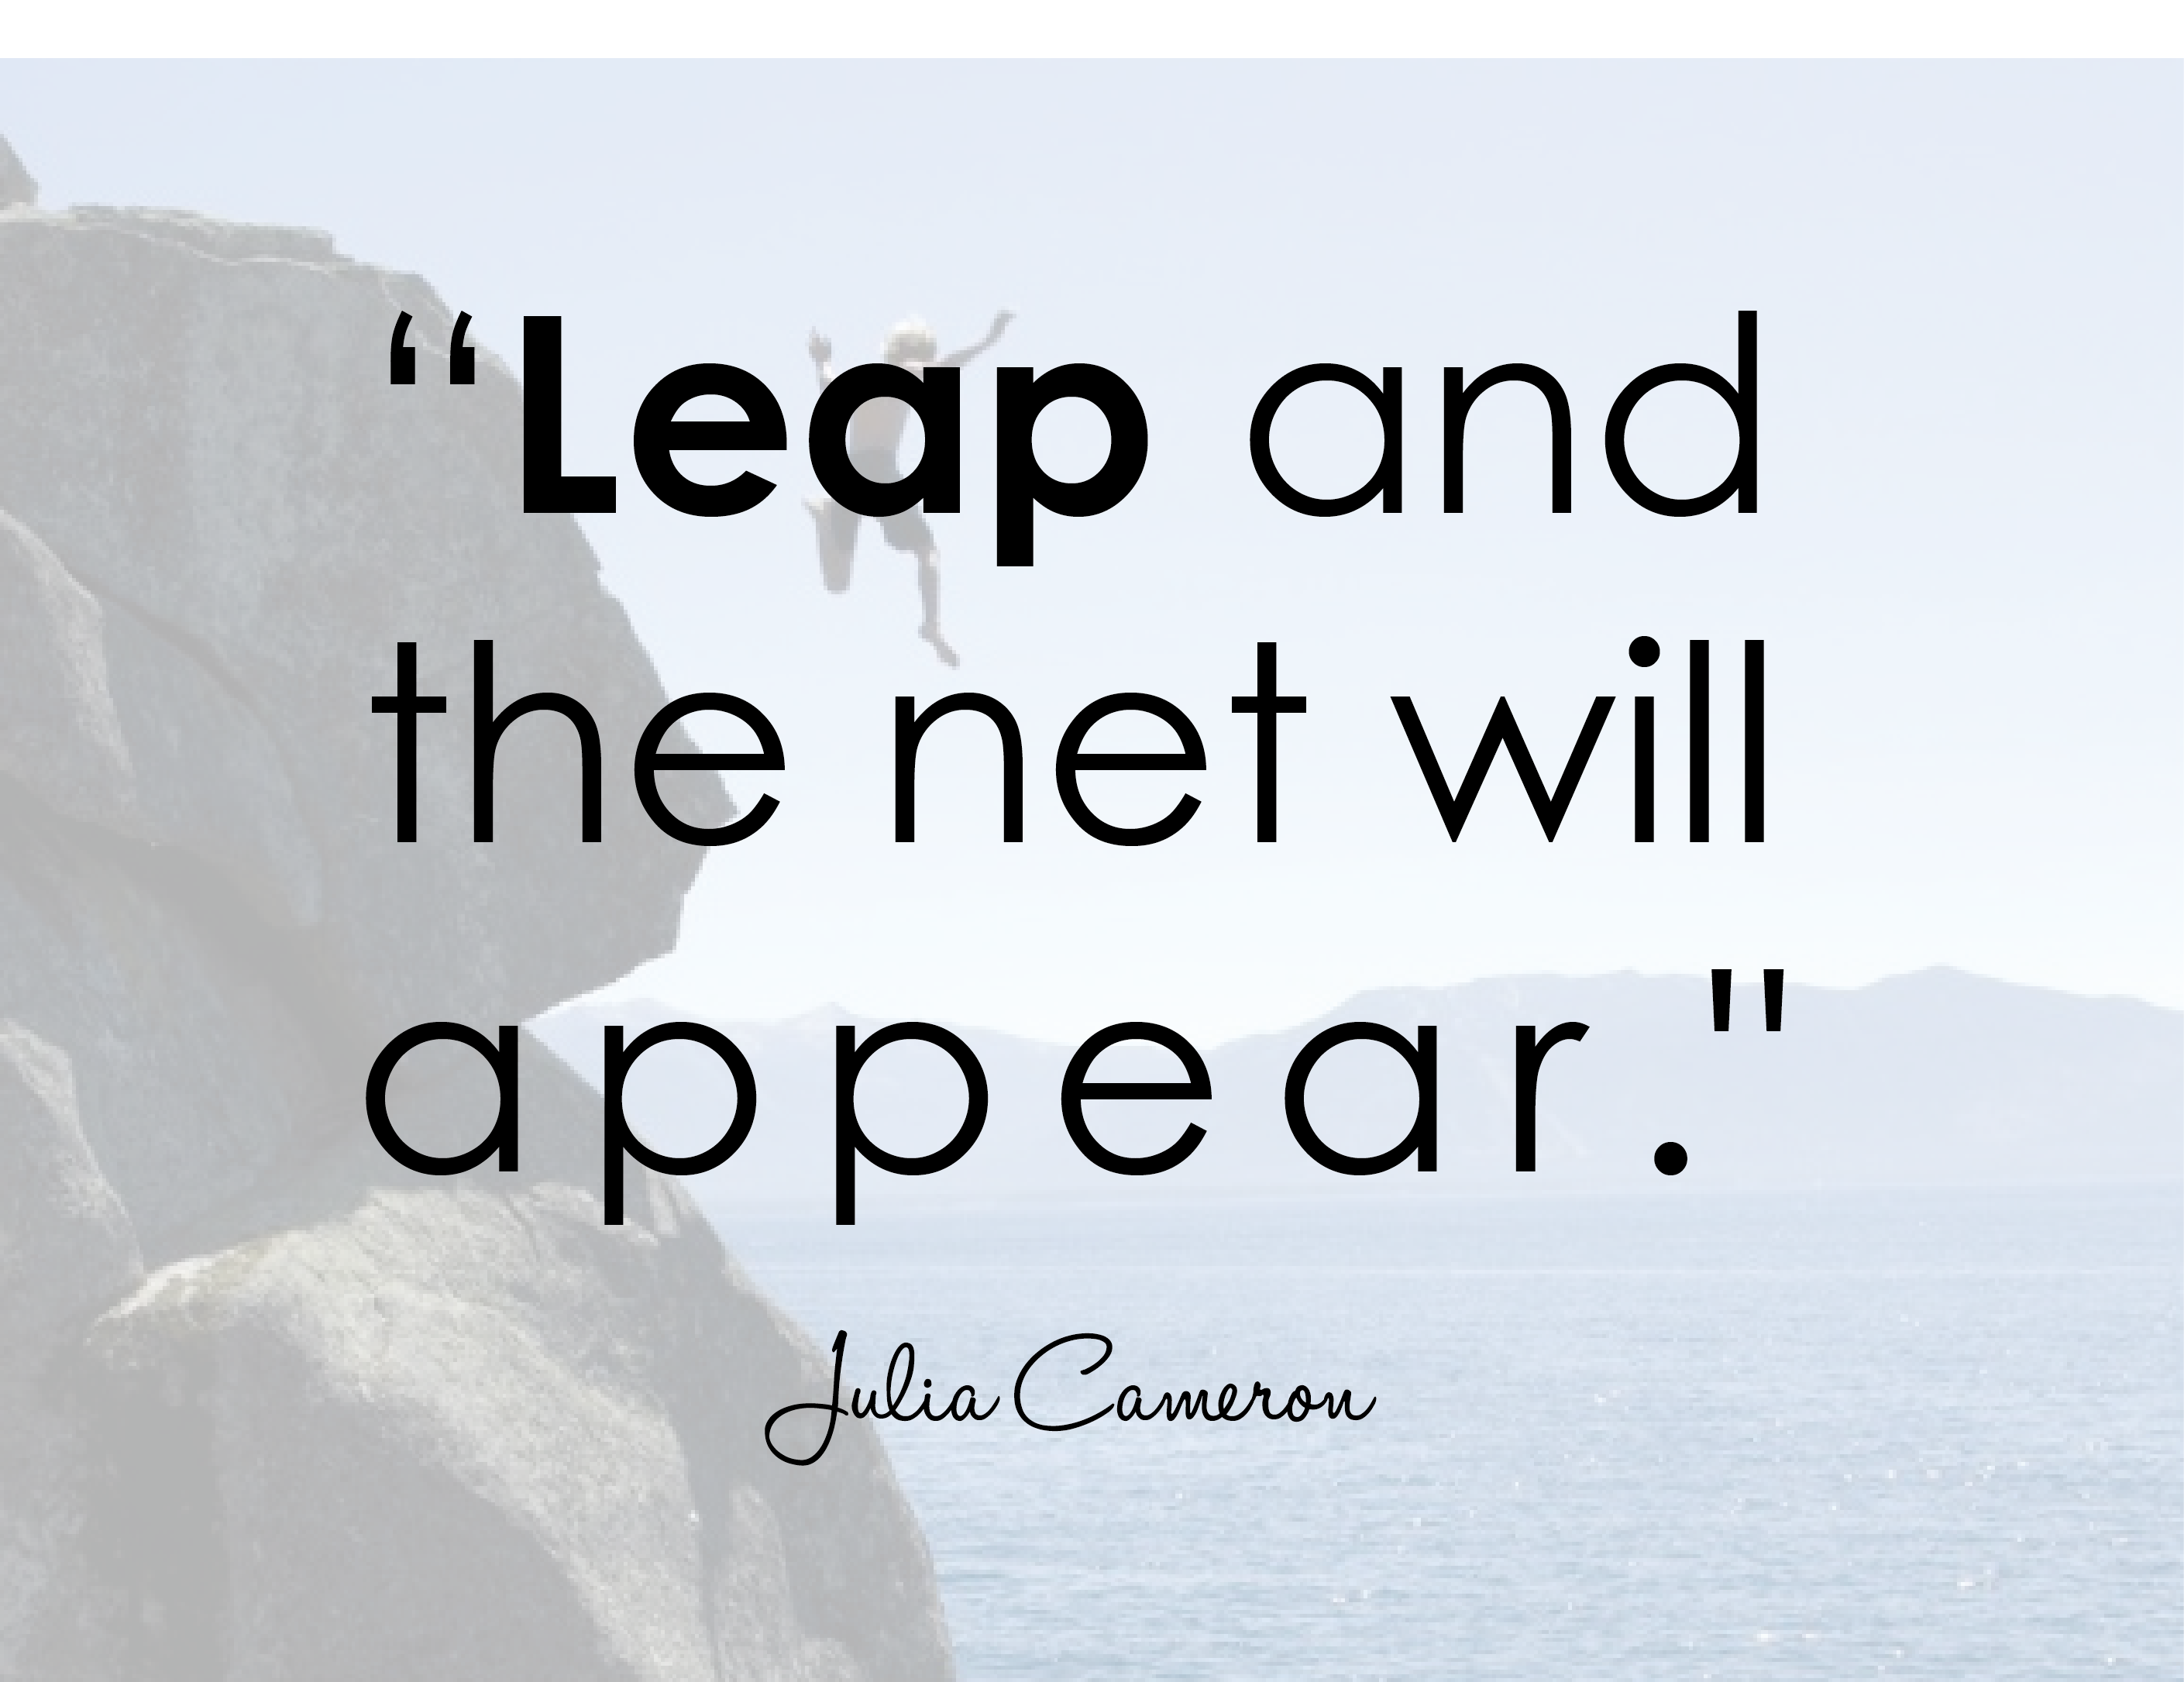 Take The Leap Quotes. QuotesGram